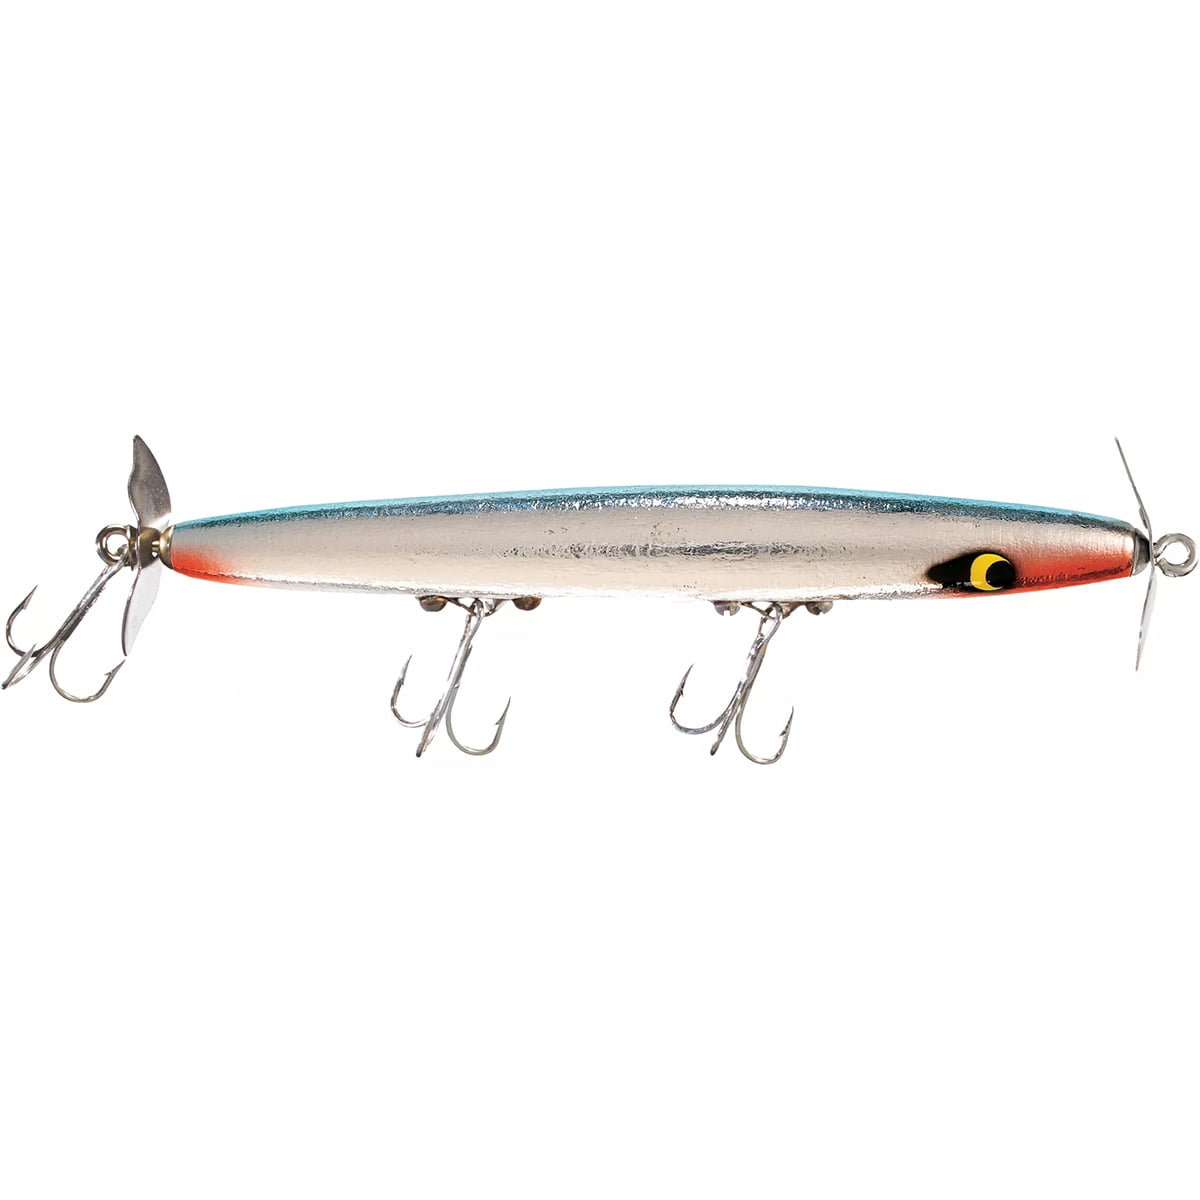  Smithwick Devil's Horse - Black Back/Dark Green Scale - 1/2 oz  : Fishing Diving Lures : Sports & Outdoors